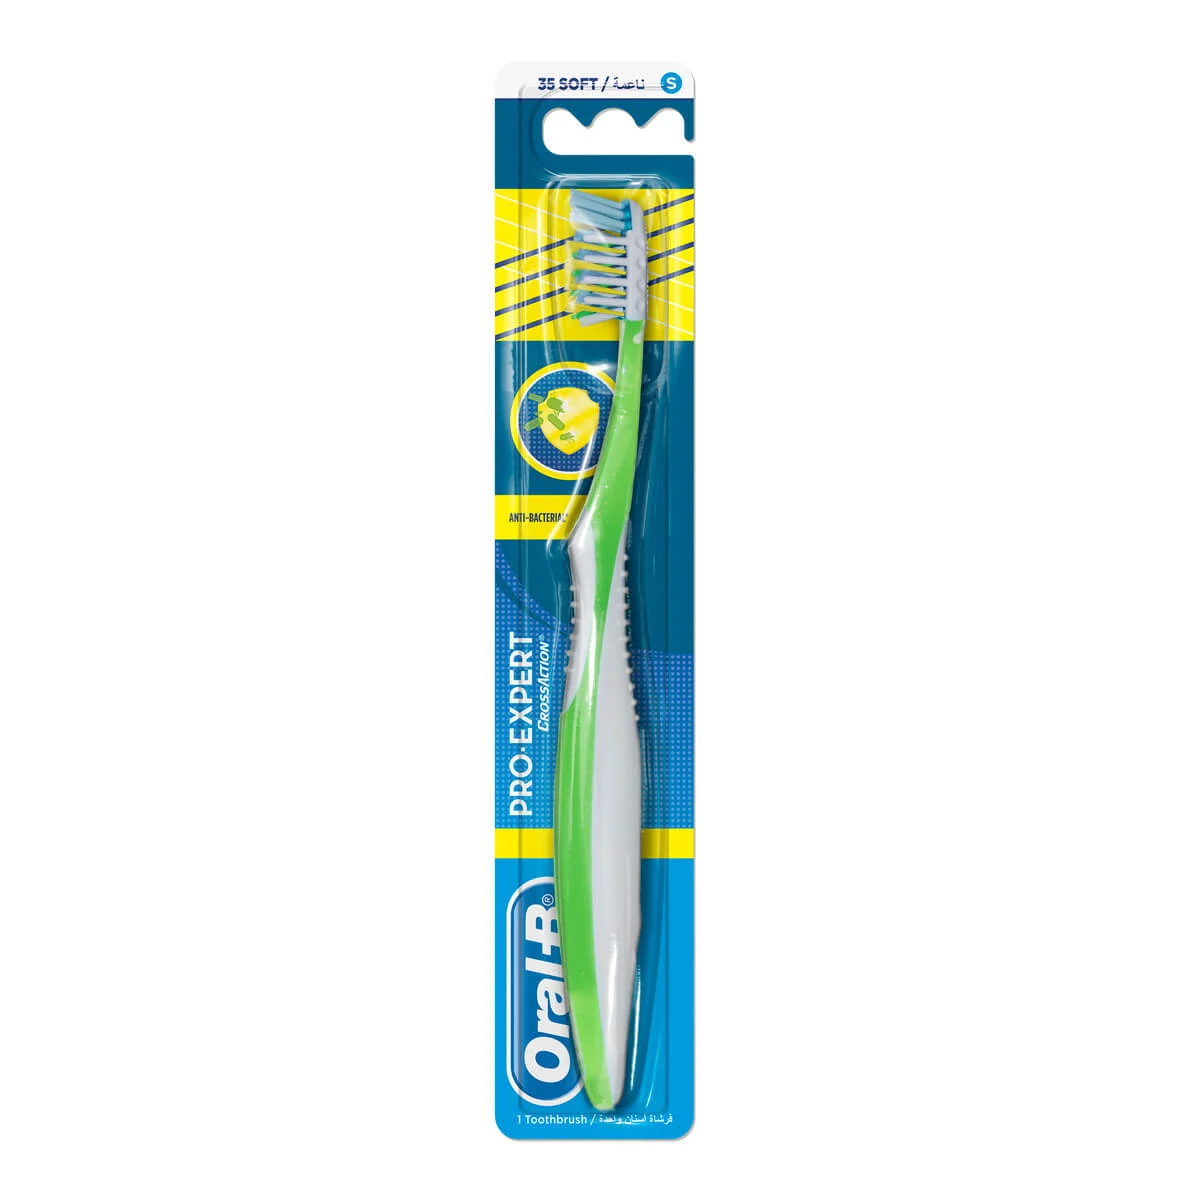 Oral-B Pro-Expert Antibacterial Manual Toothbrush undefined